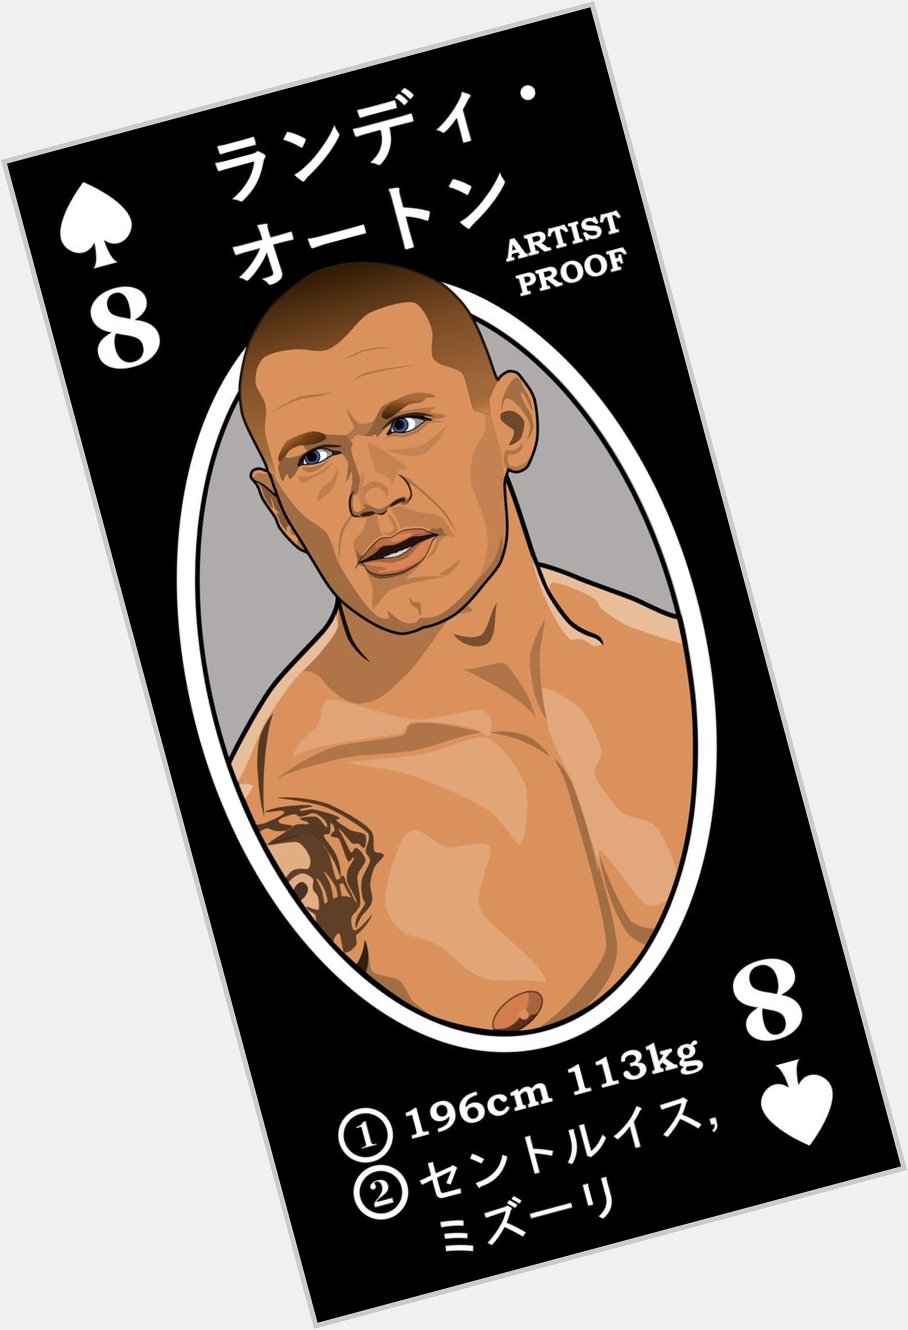 Happy 43rd Birthday to the Viper, Randy Orton! 

I hope to see him healthy and back in action soon. 